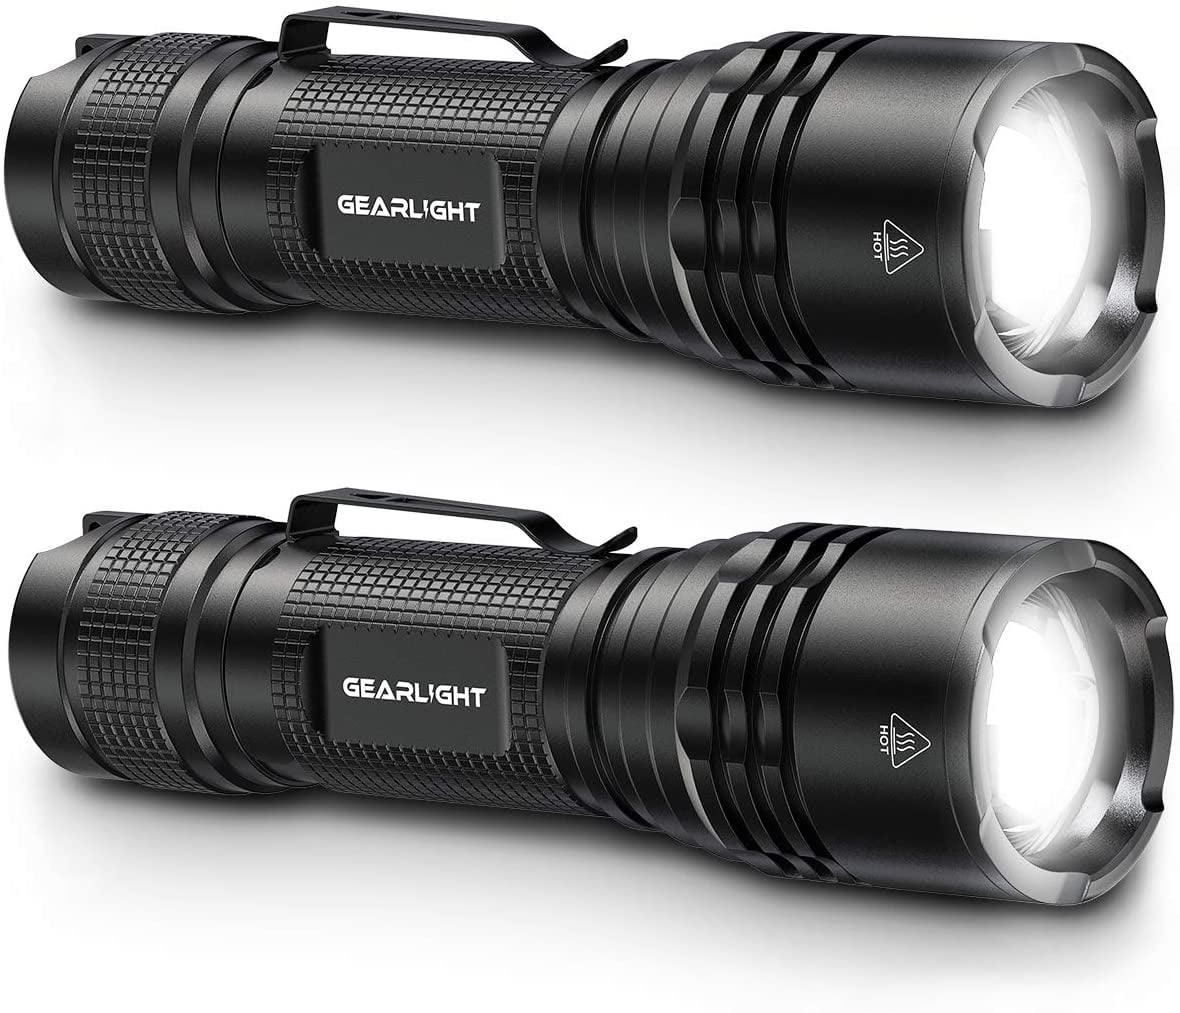 TAC LED Flashlight Tactical (Gifts Men Flashlights Bright Compact & Women) - for 2 Super Pack